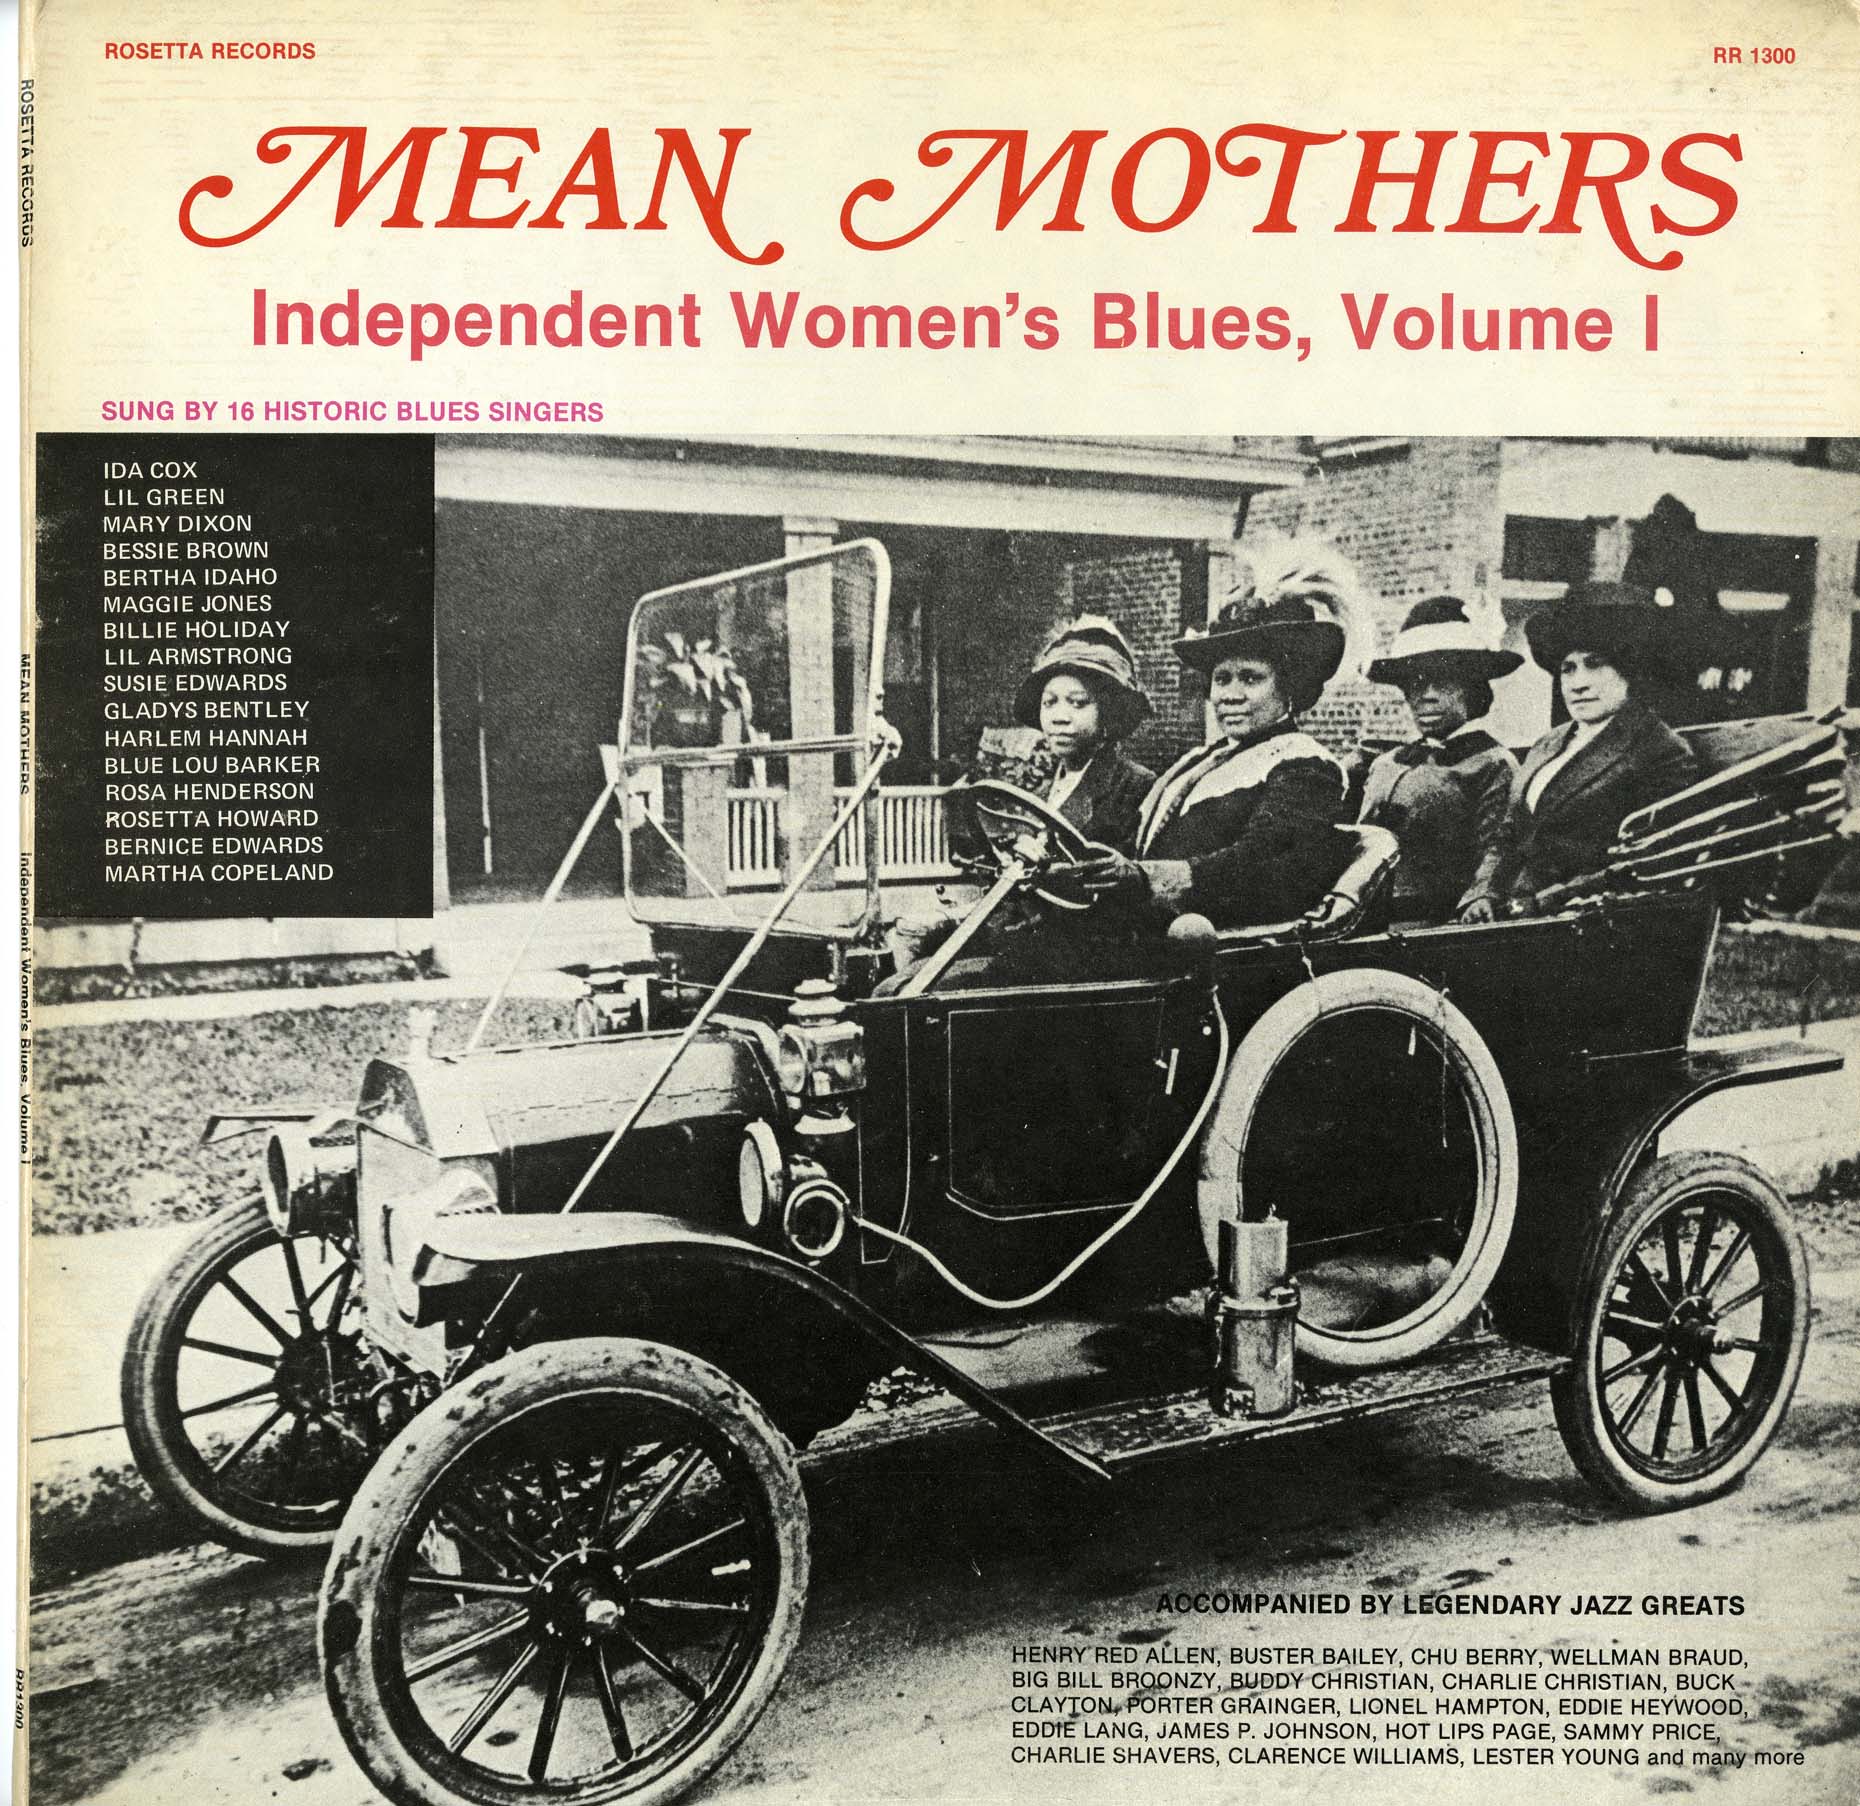 Cover of a vinyl record album titled Mean Mothers with 4 women in a car